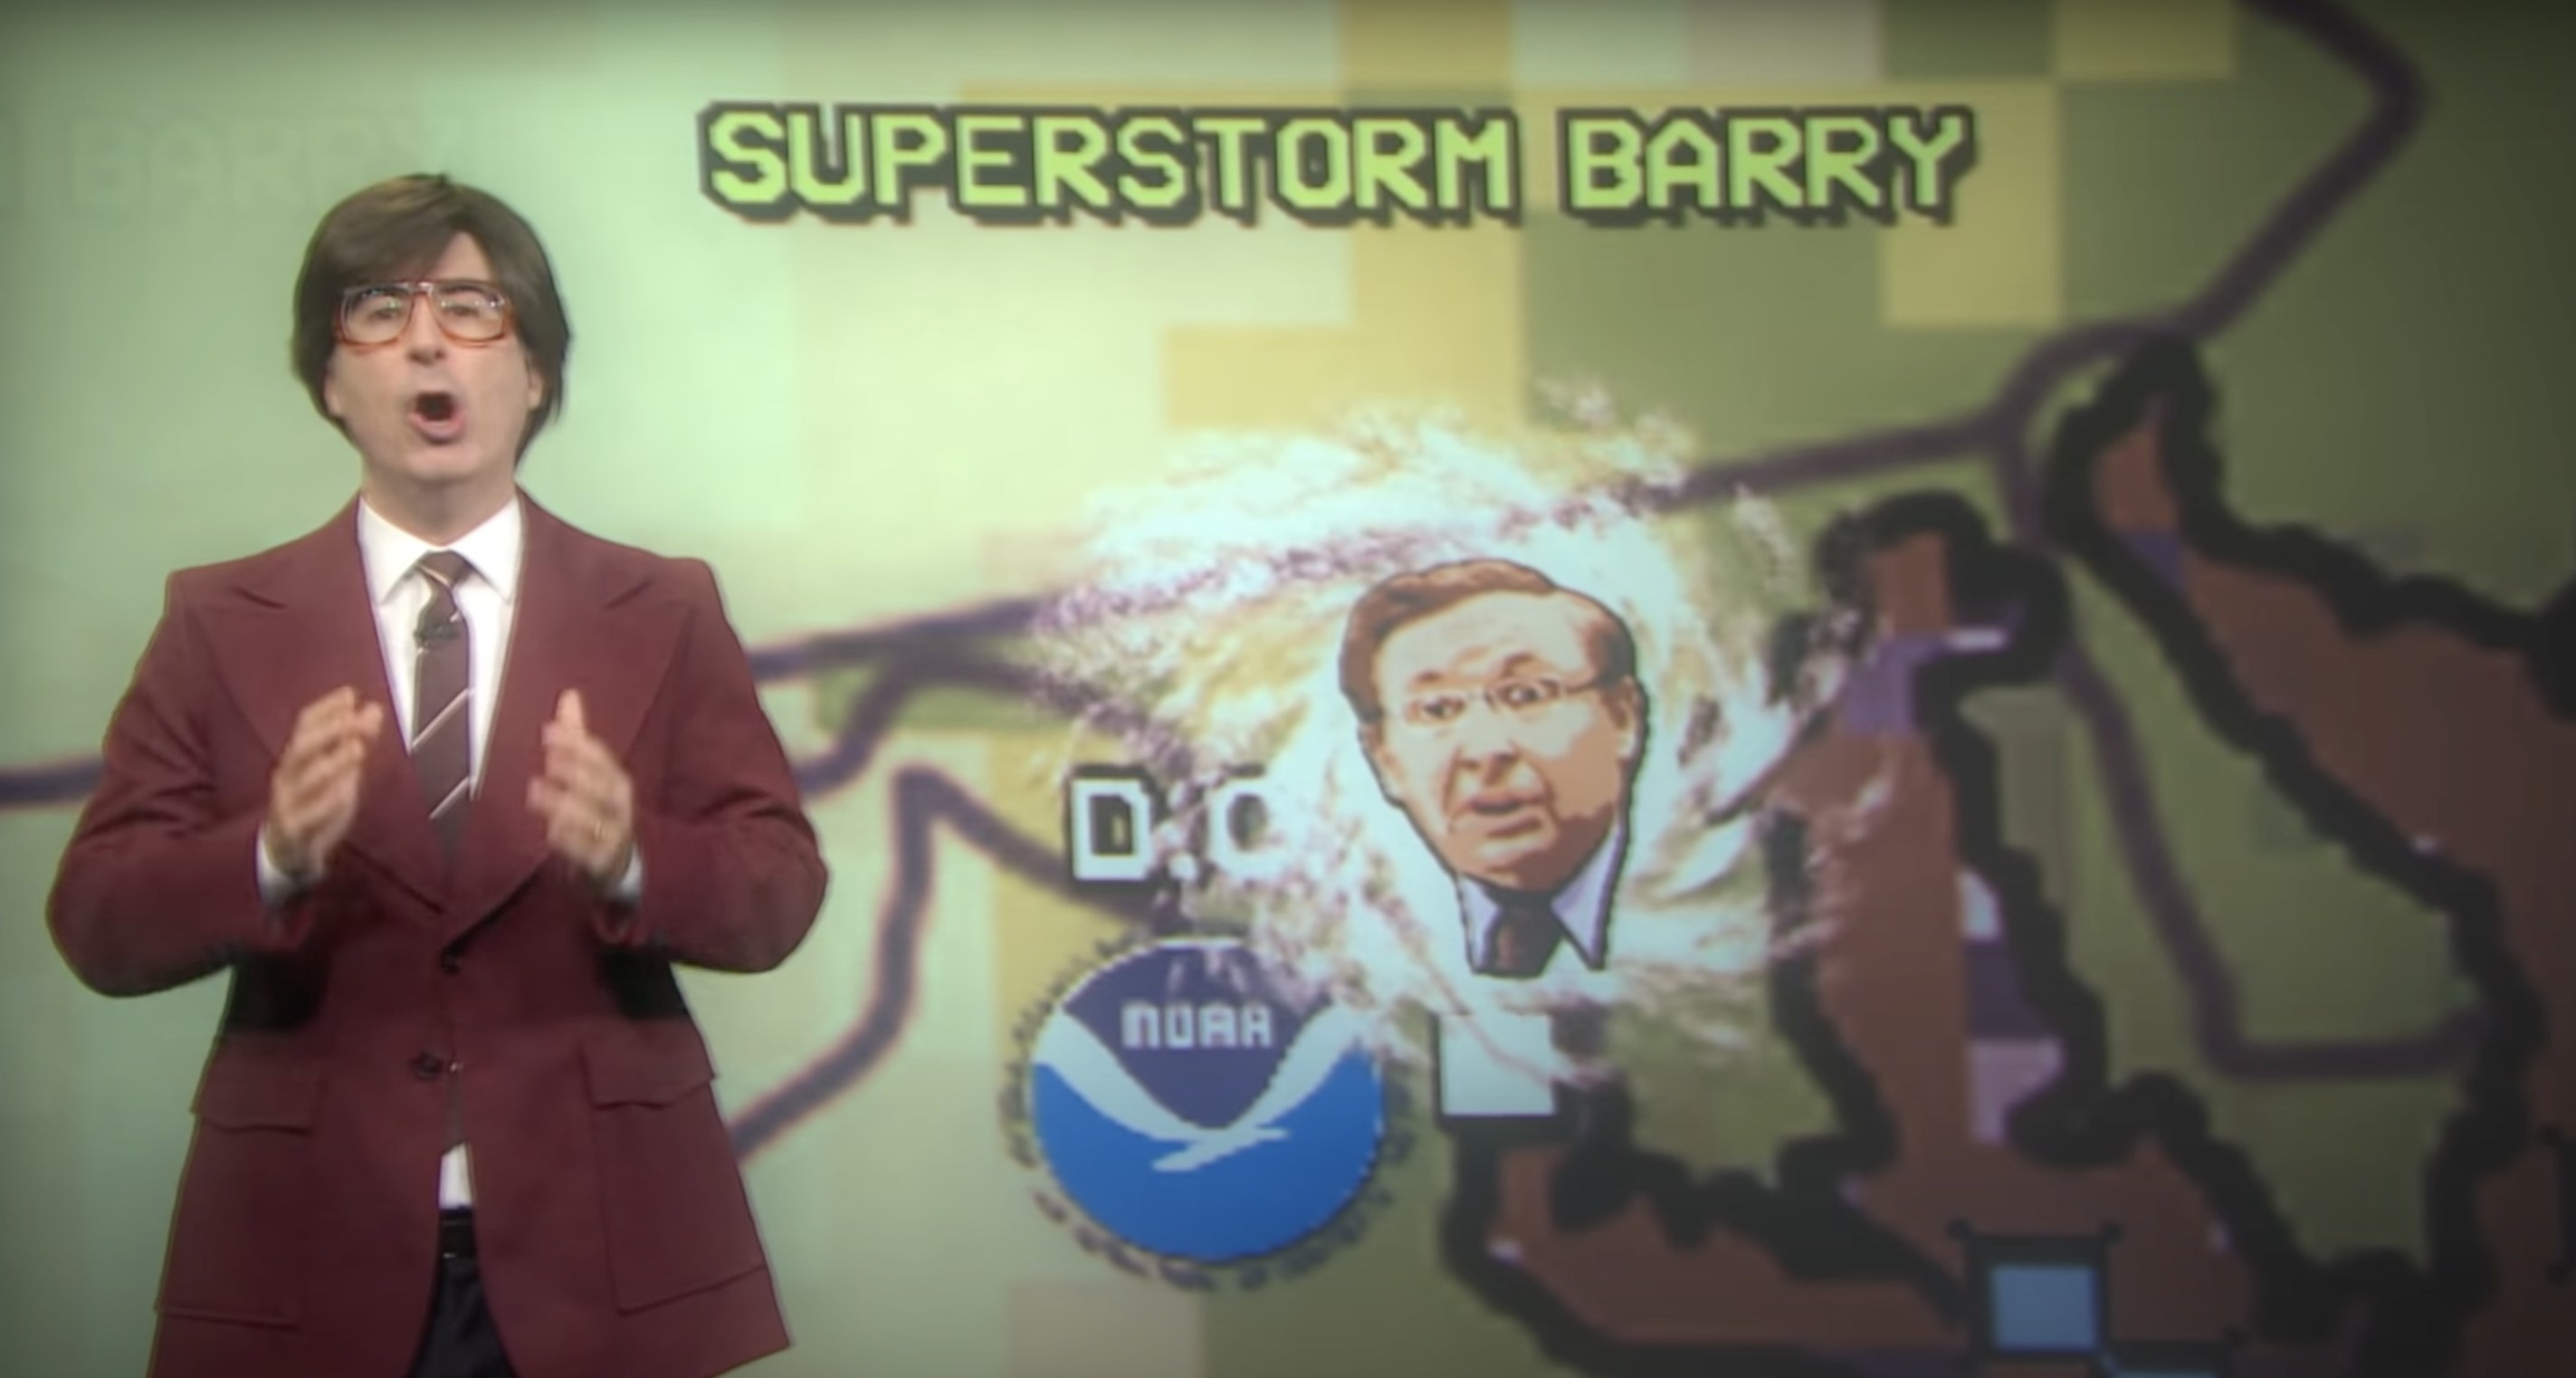 John Oliver wearing a wig, dressed as a 70s meteorologist, in front of an image of a superstorm Barry over Maryland, which is a hurricane with the face of someone named Barry on it